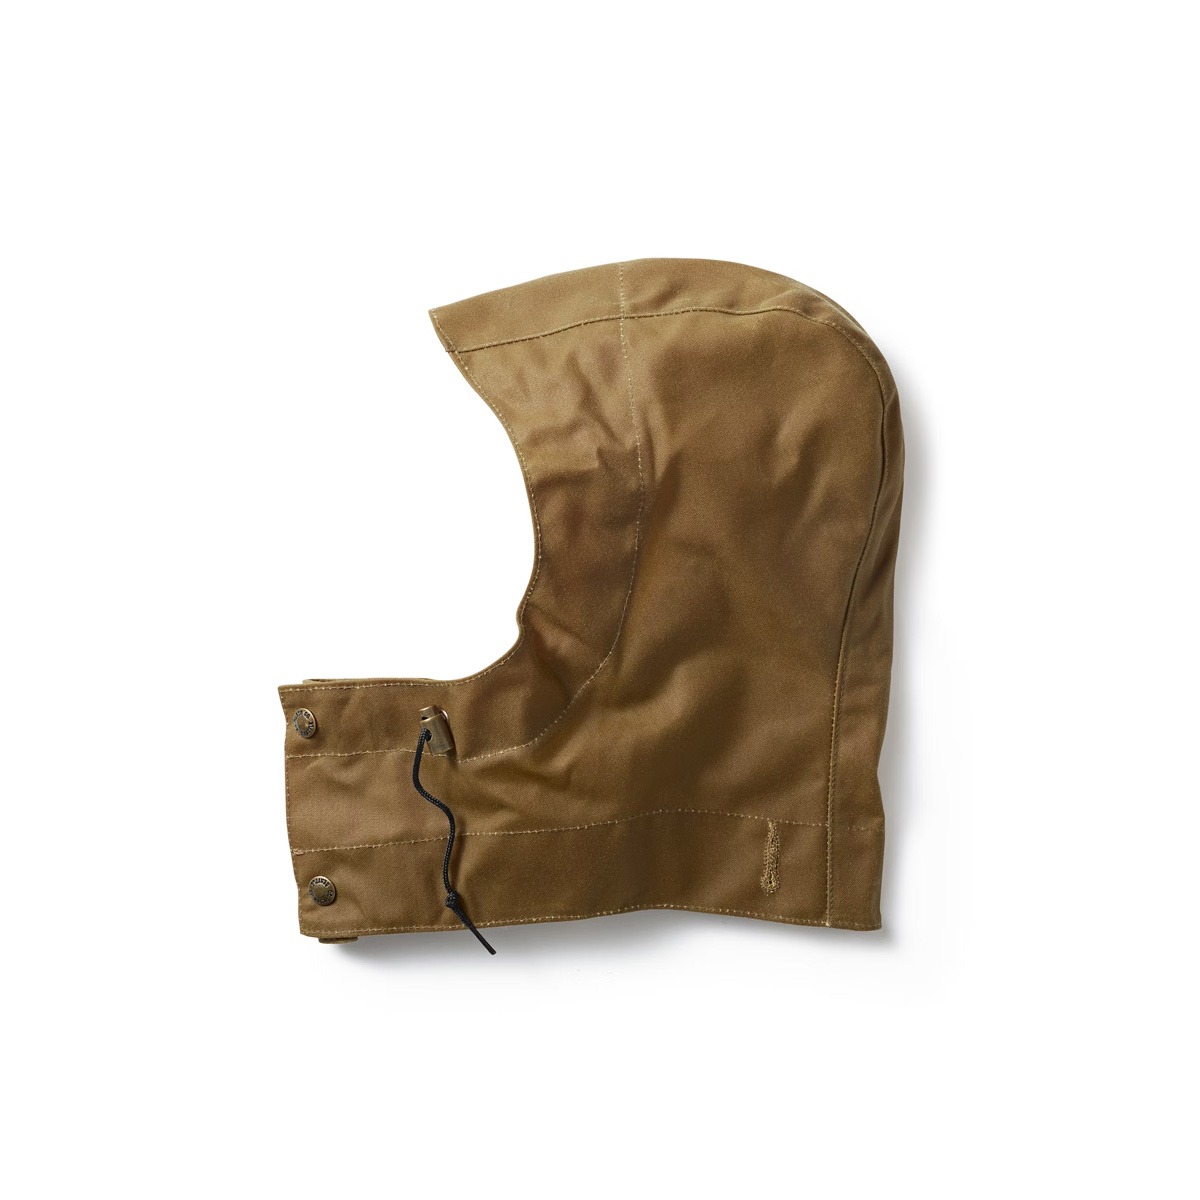 Filson Tin Cloth Hood Dark Tan, Historic, proven protection from water and abrasion